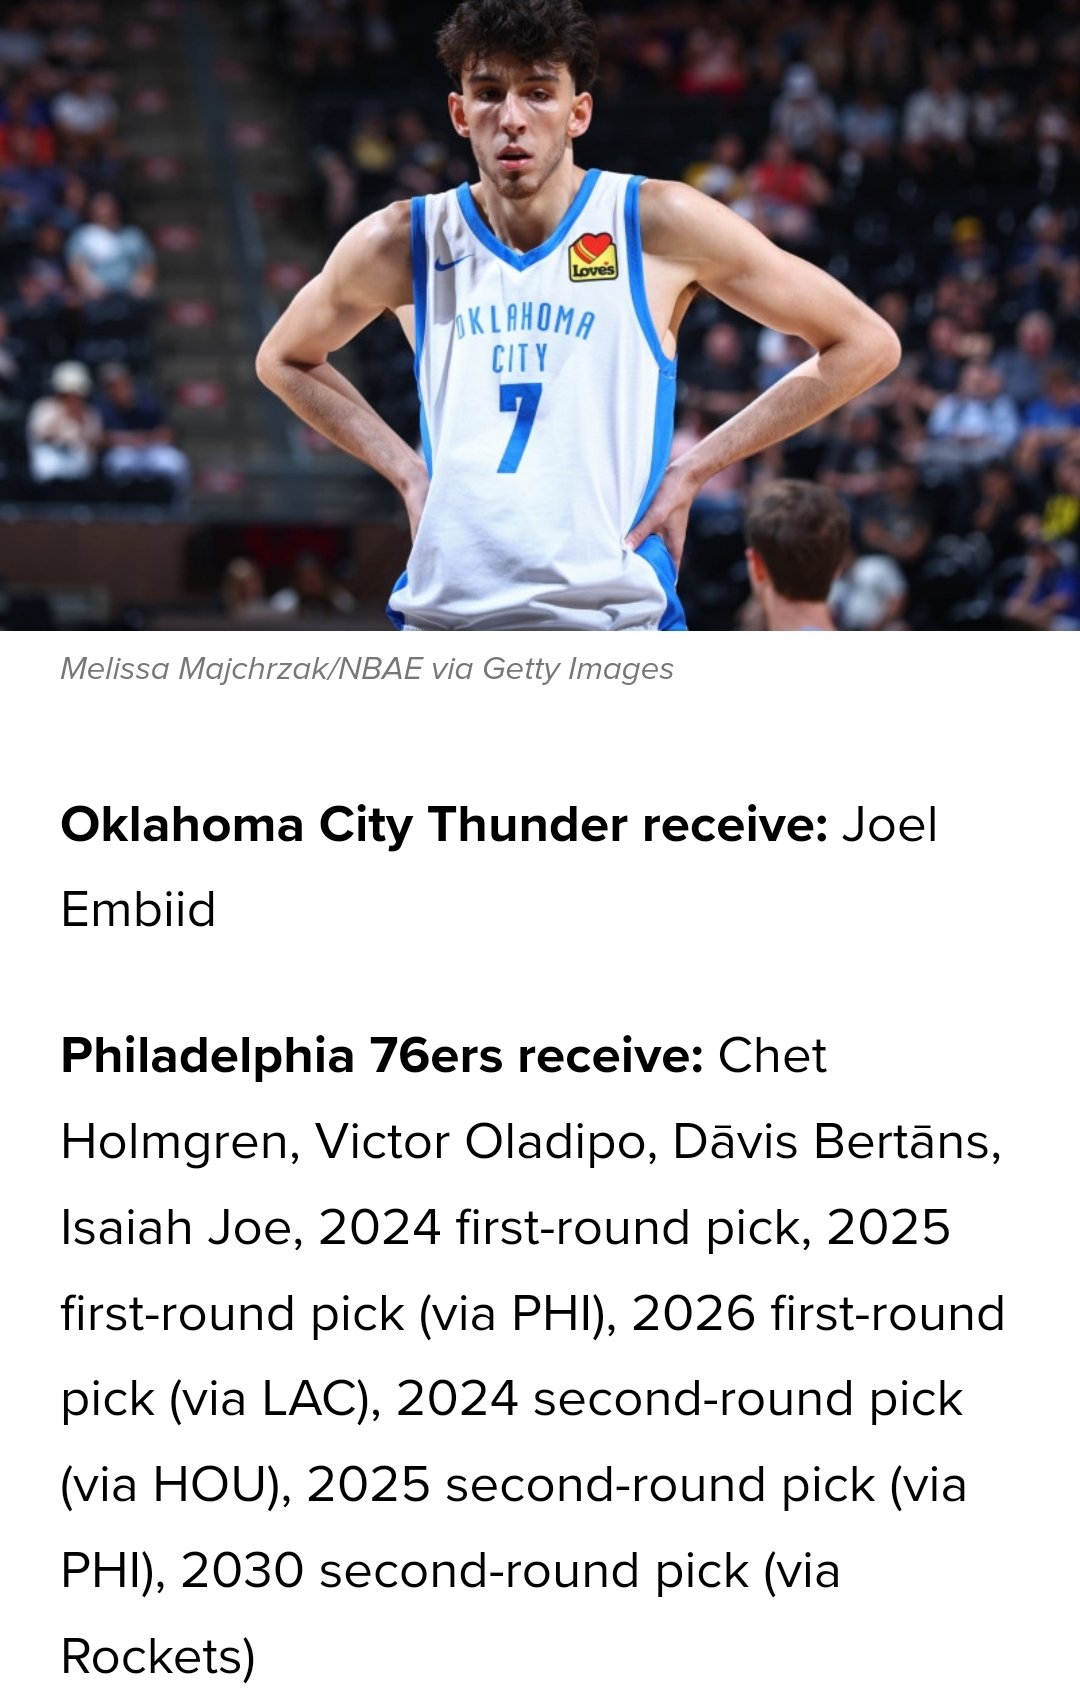 Sixers pick Joe in 2nd round